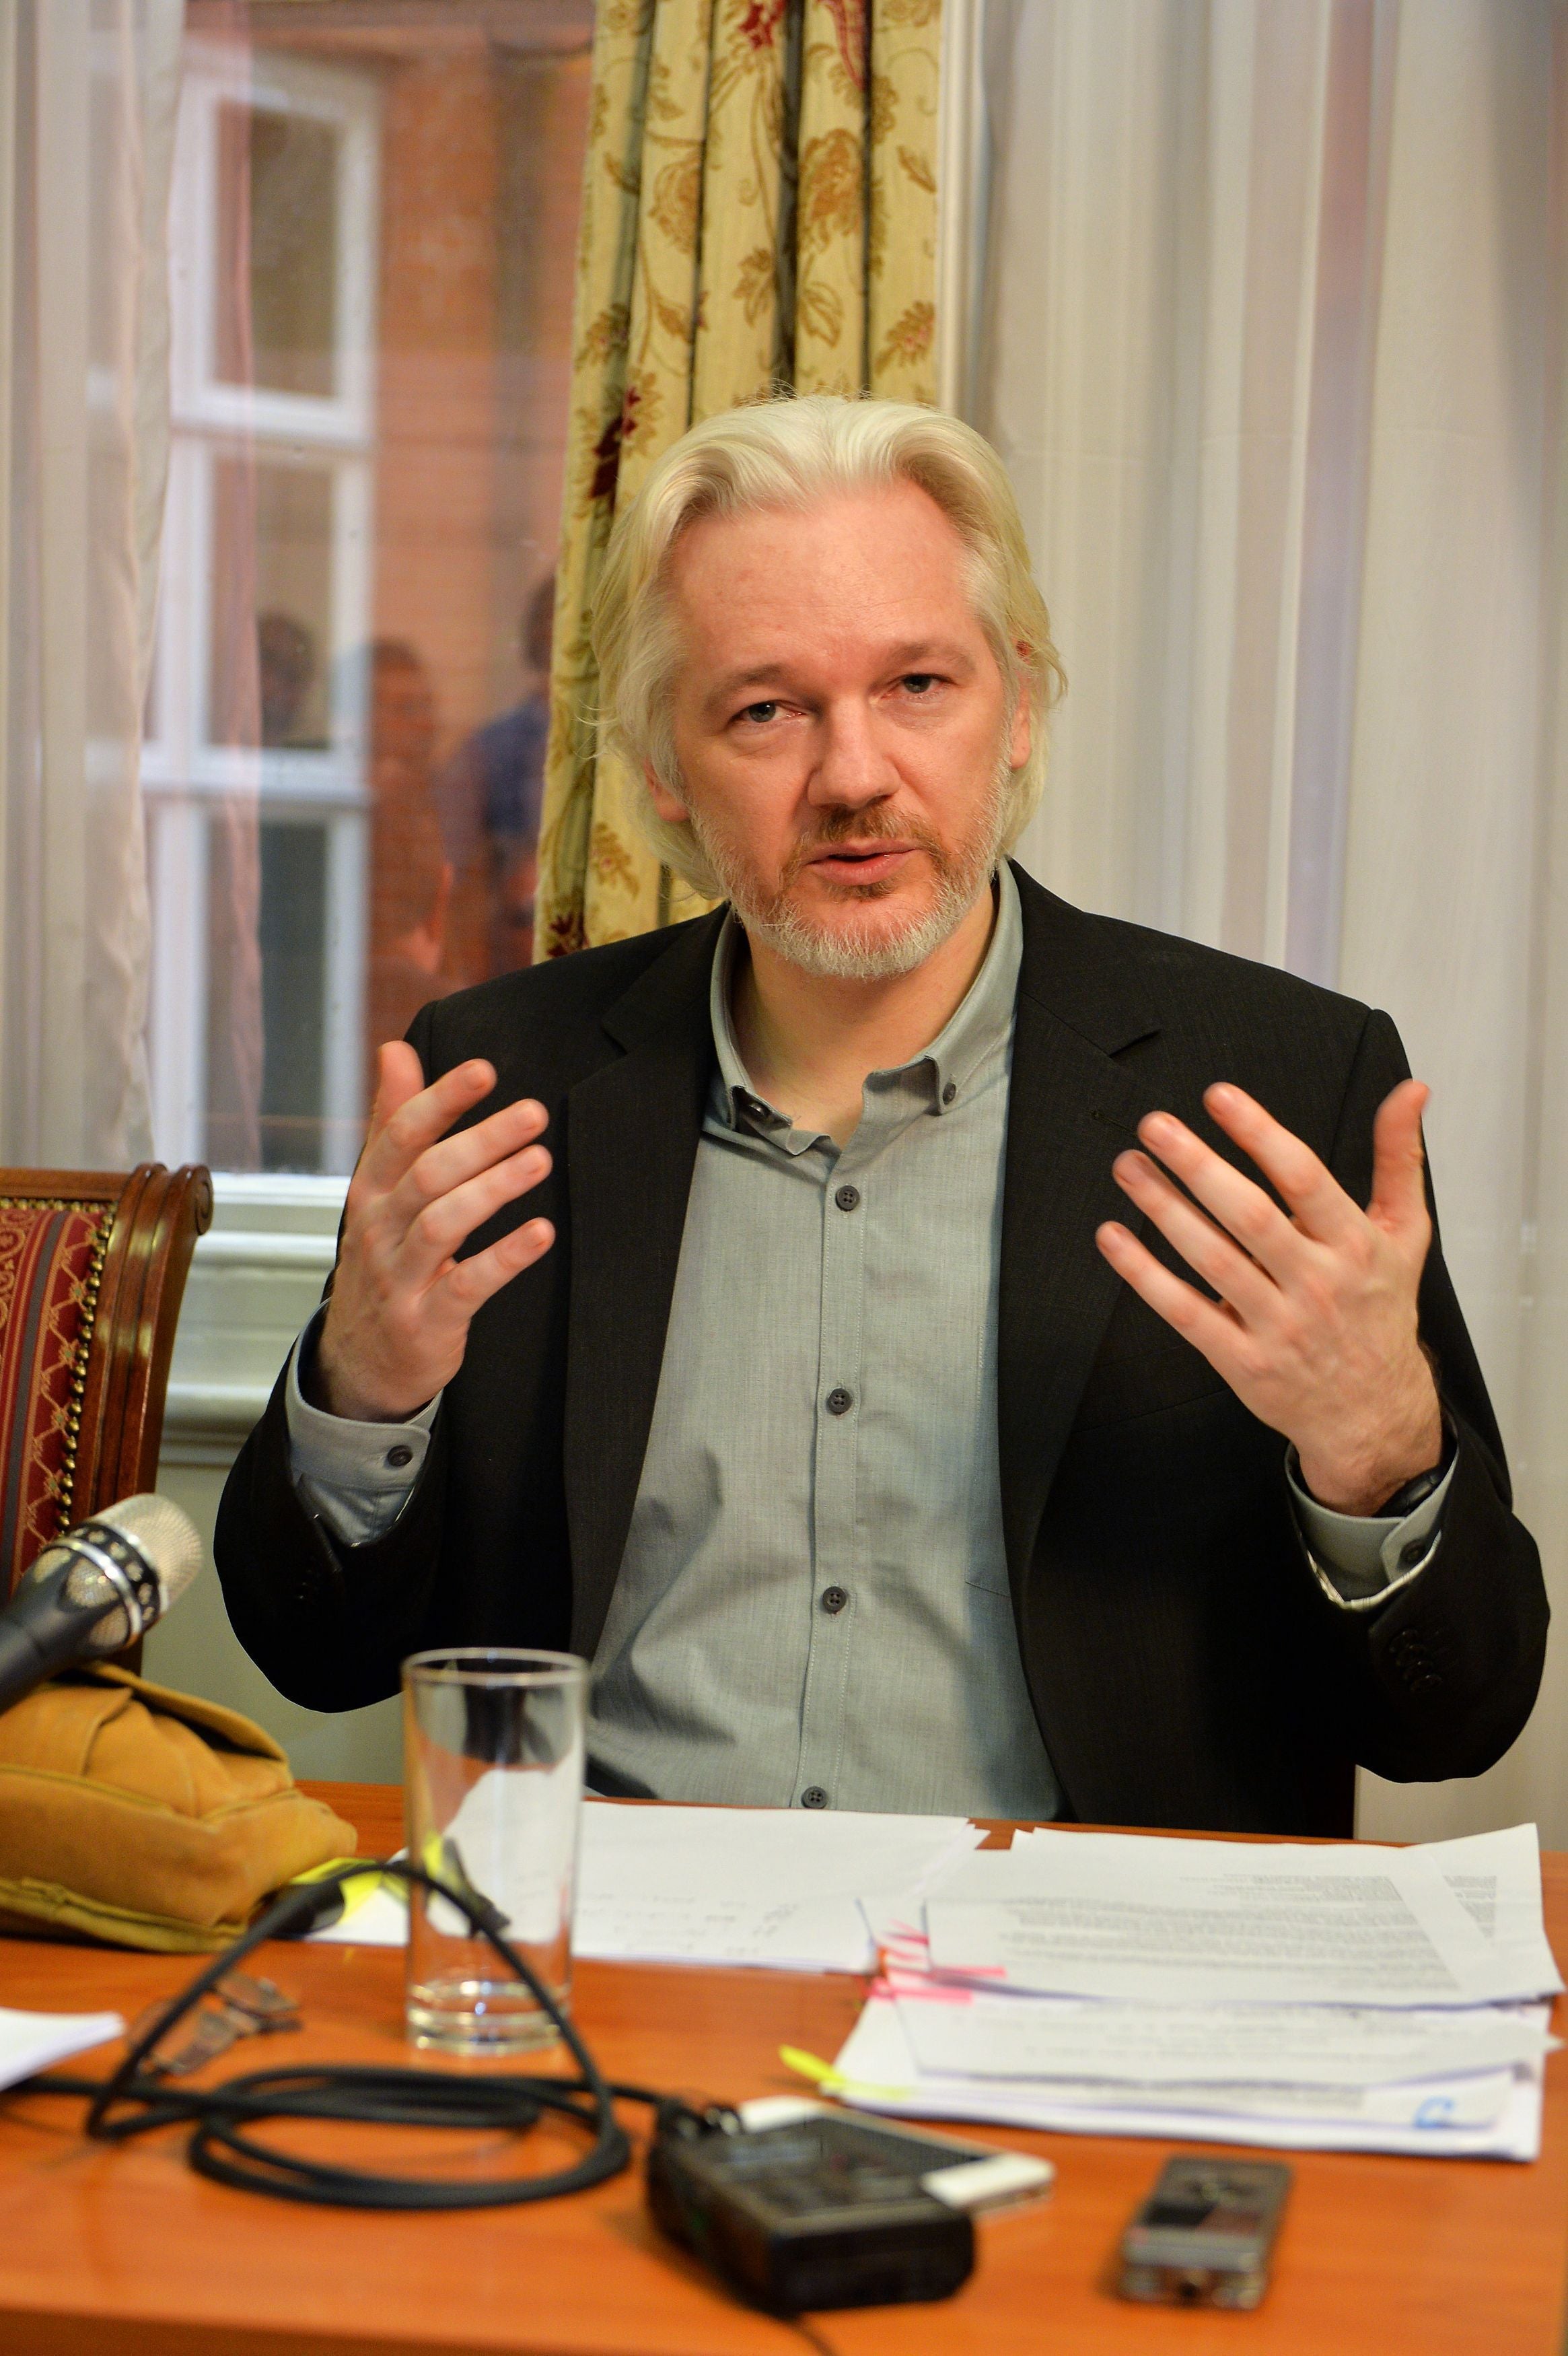 Julian Assange speaks during a press conference inside the Ecuadorian embassy in London (PA)